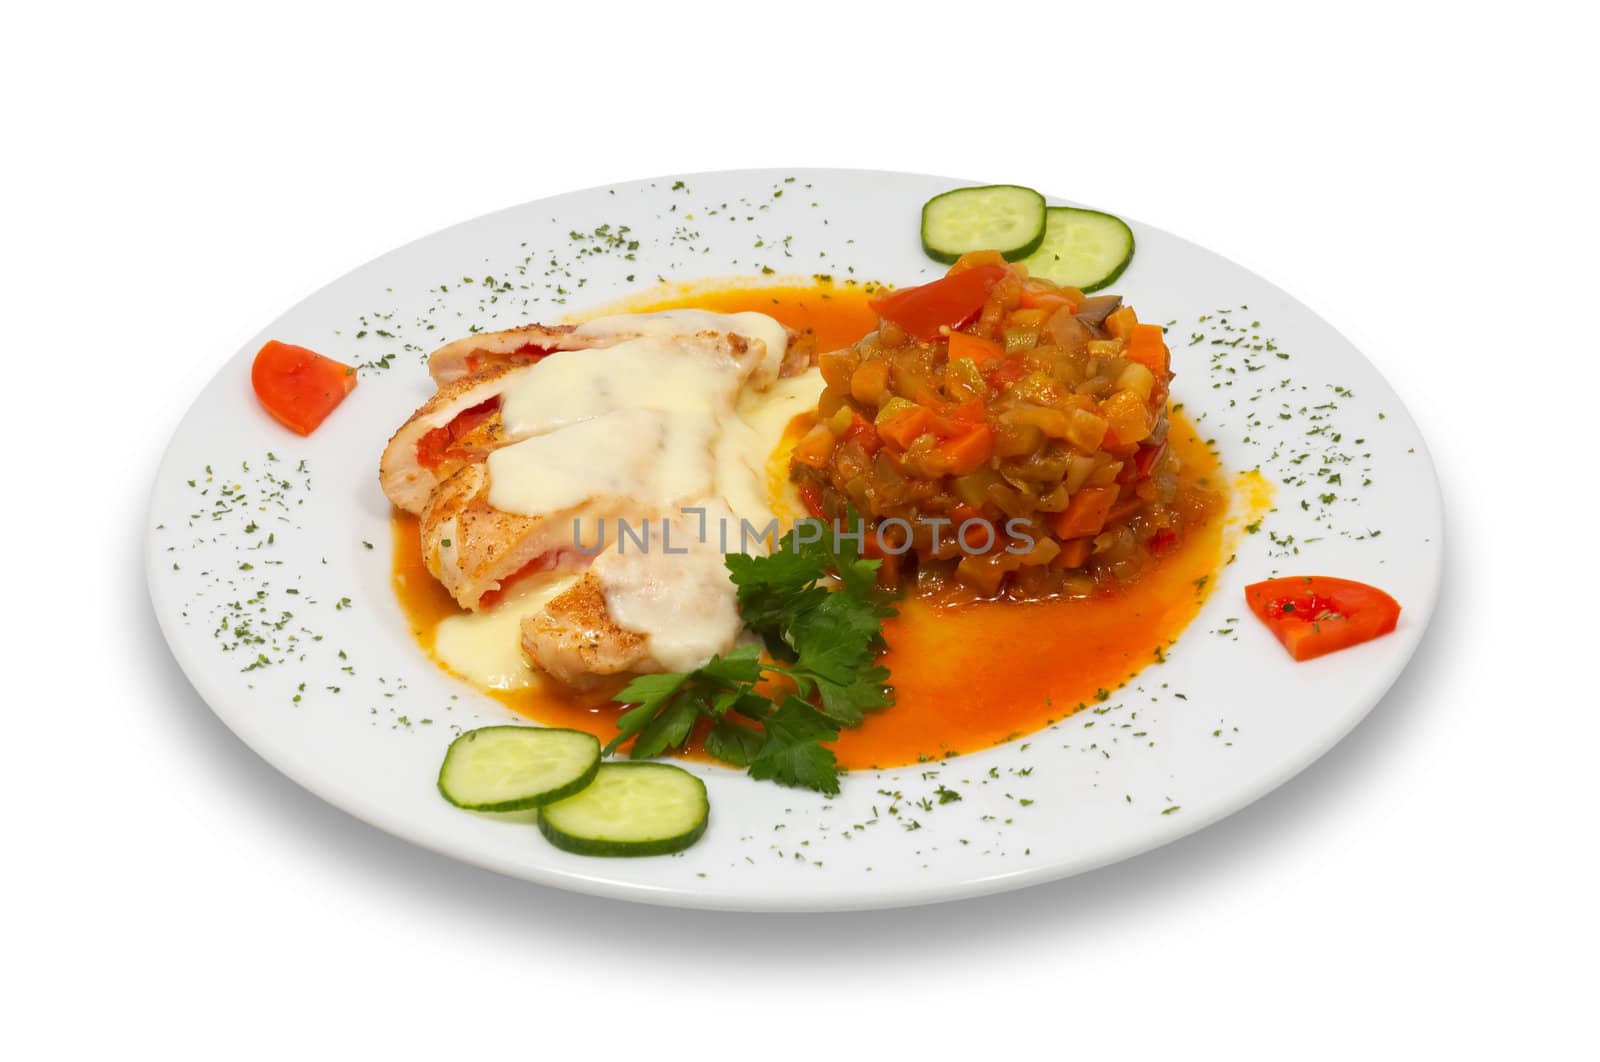 grilled stuffed chicken fillet under white sauce with stewed vegetable garnish, isolated